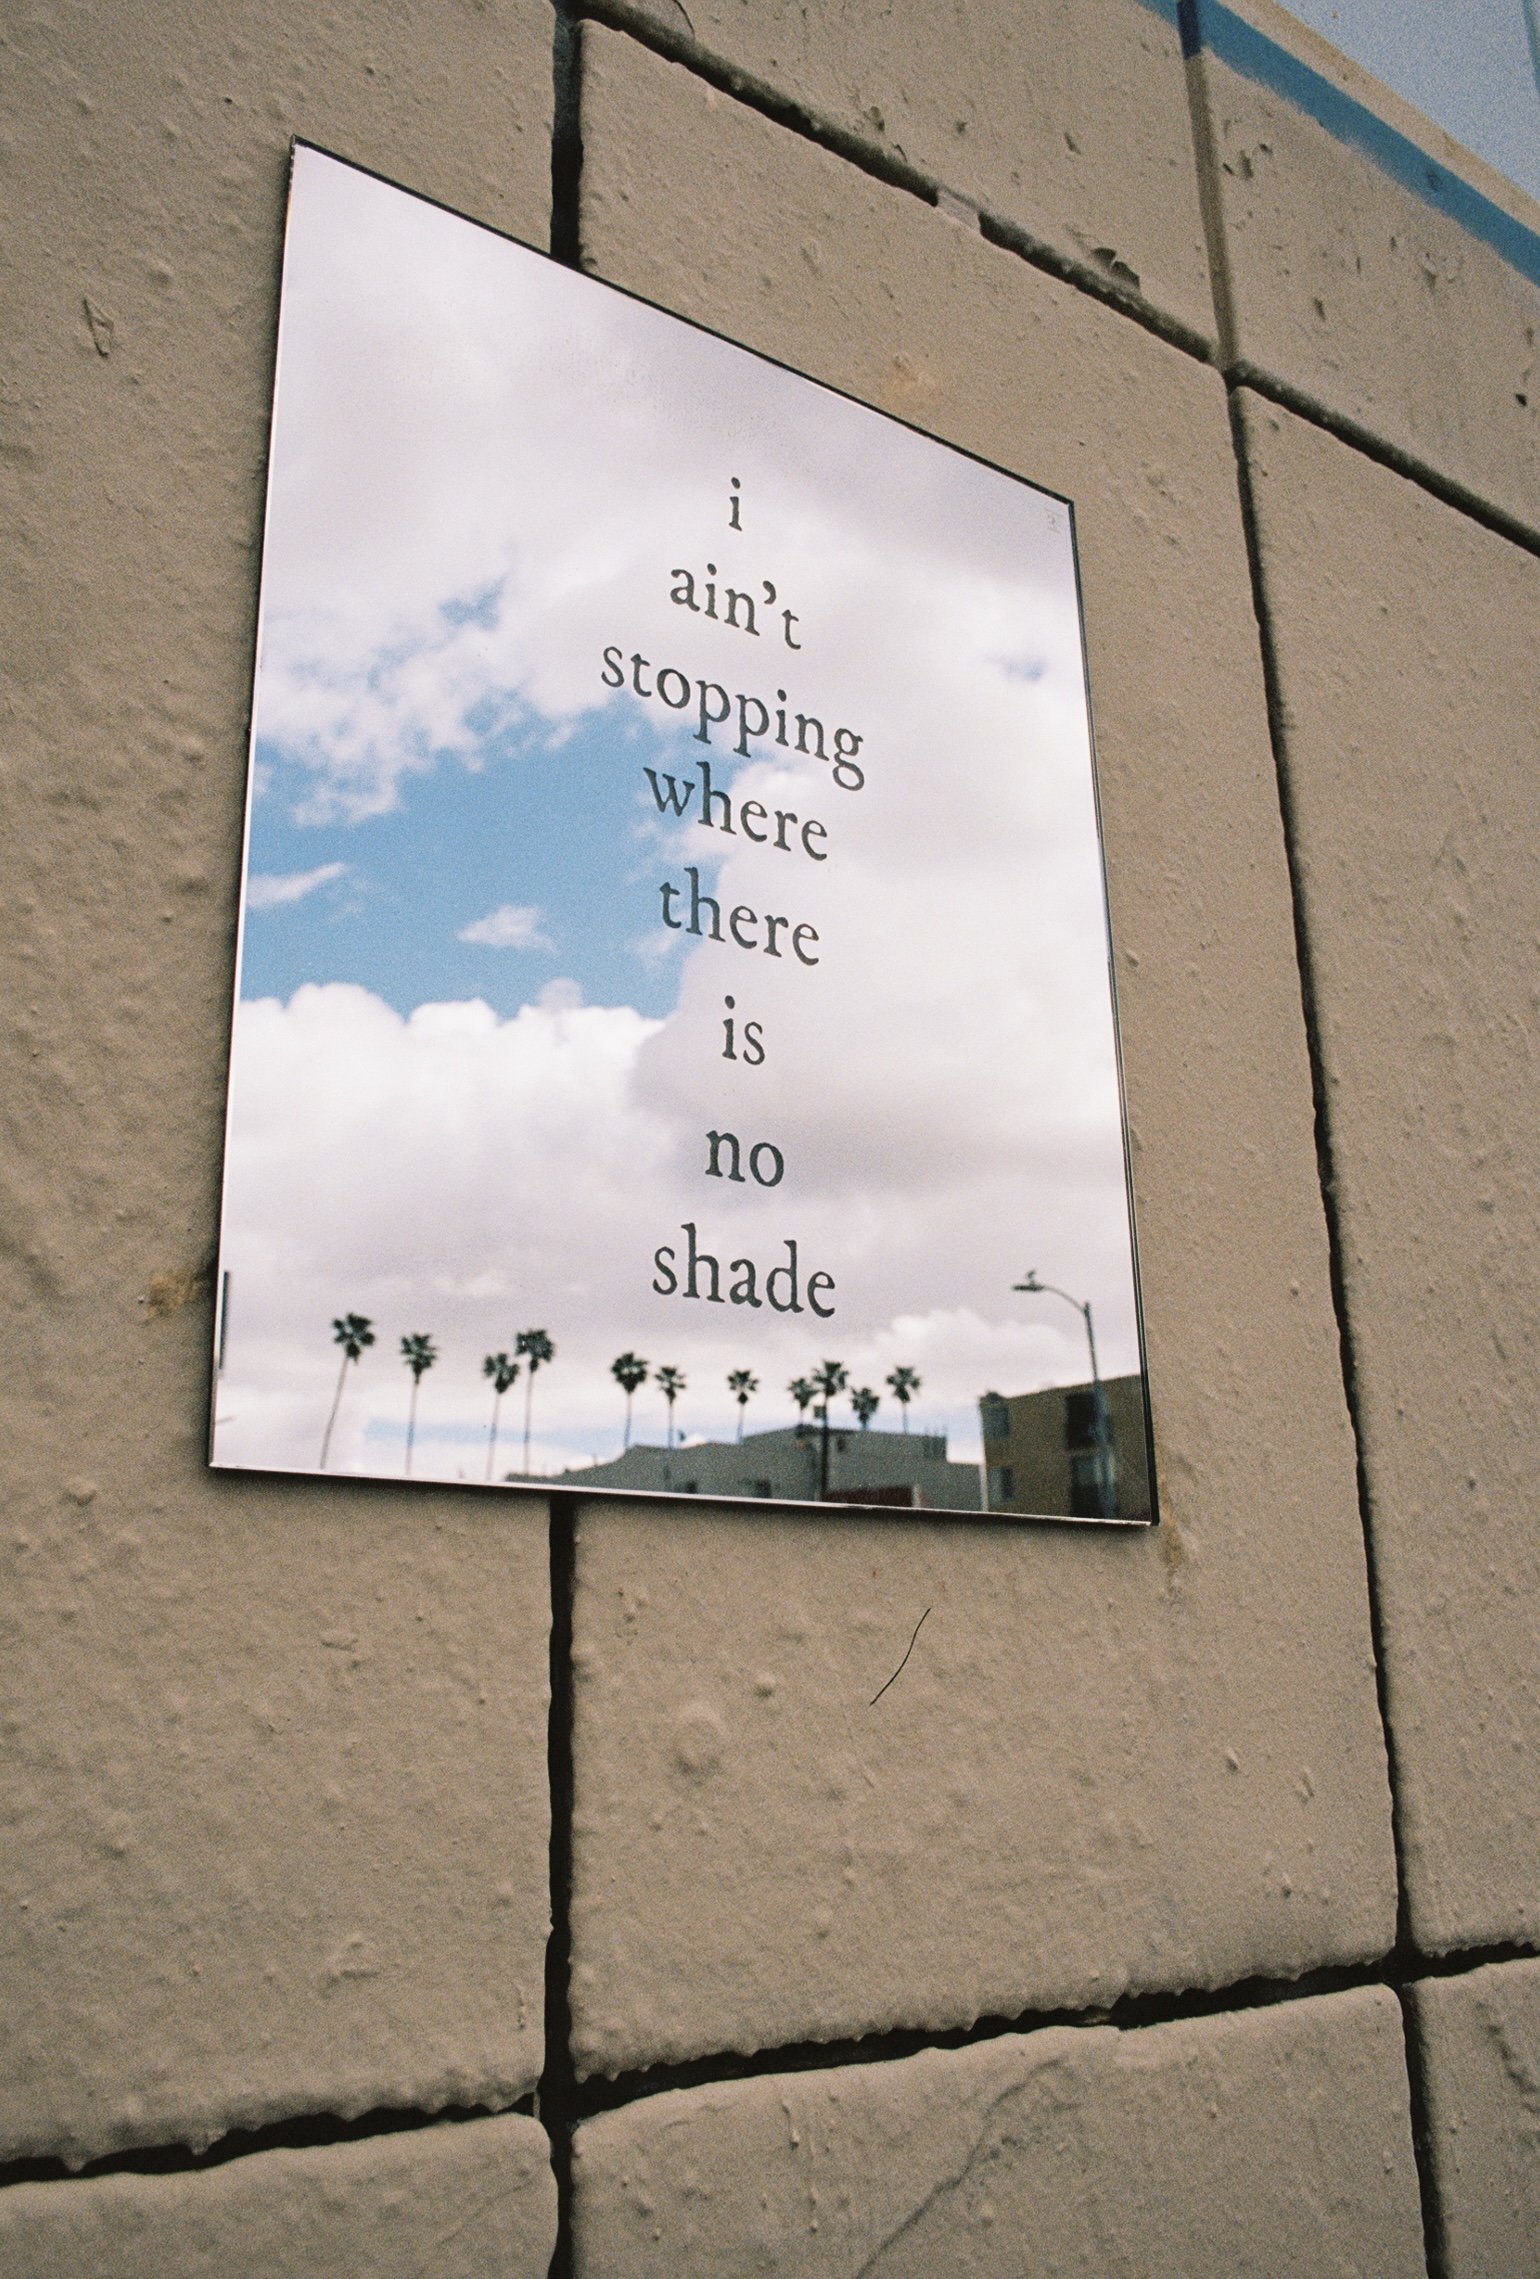 "i ain't stopping where there is no shade", Catalina Street, Koreatown